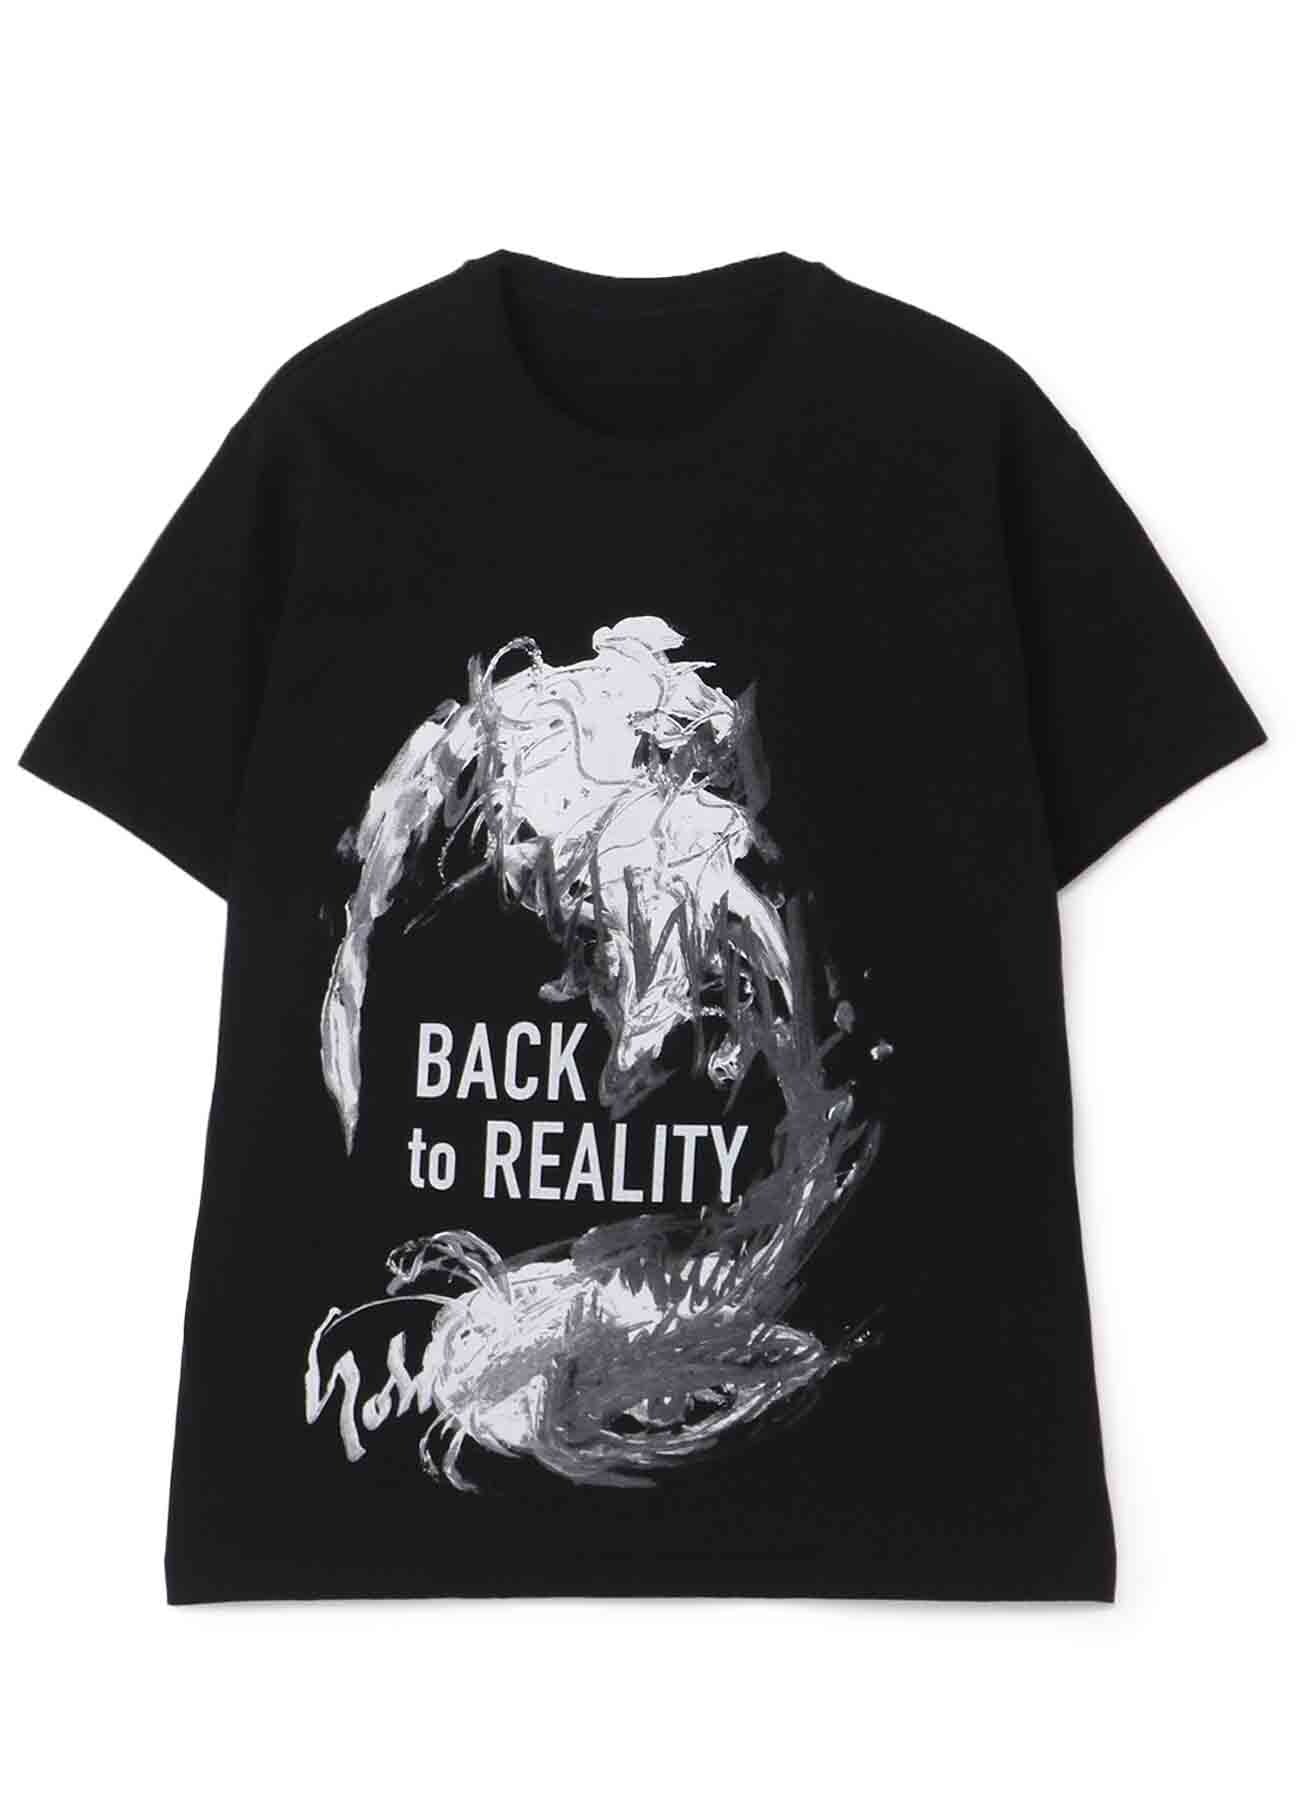 S’YTE 10TH BACK TO REALITY  YY T-SHIRT